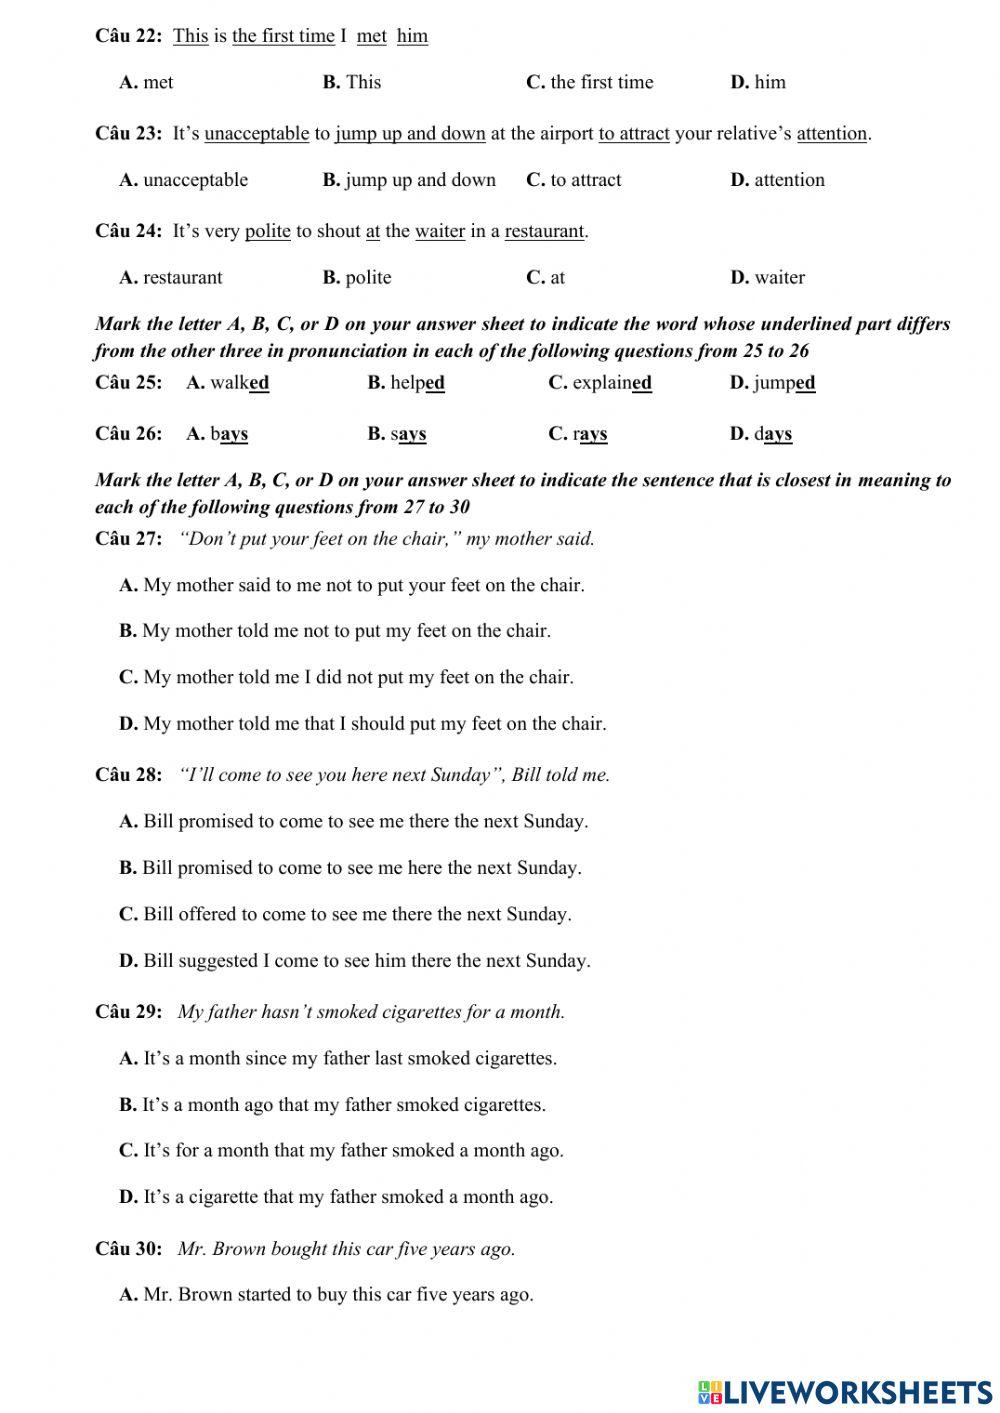 MOET English G12 - Review for 45-min Test (1)